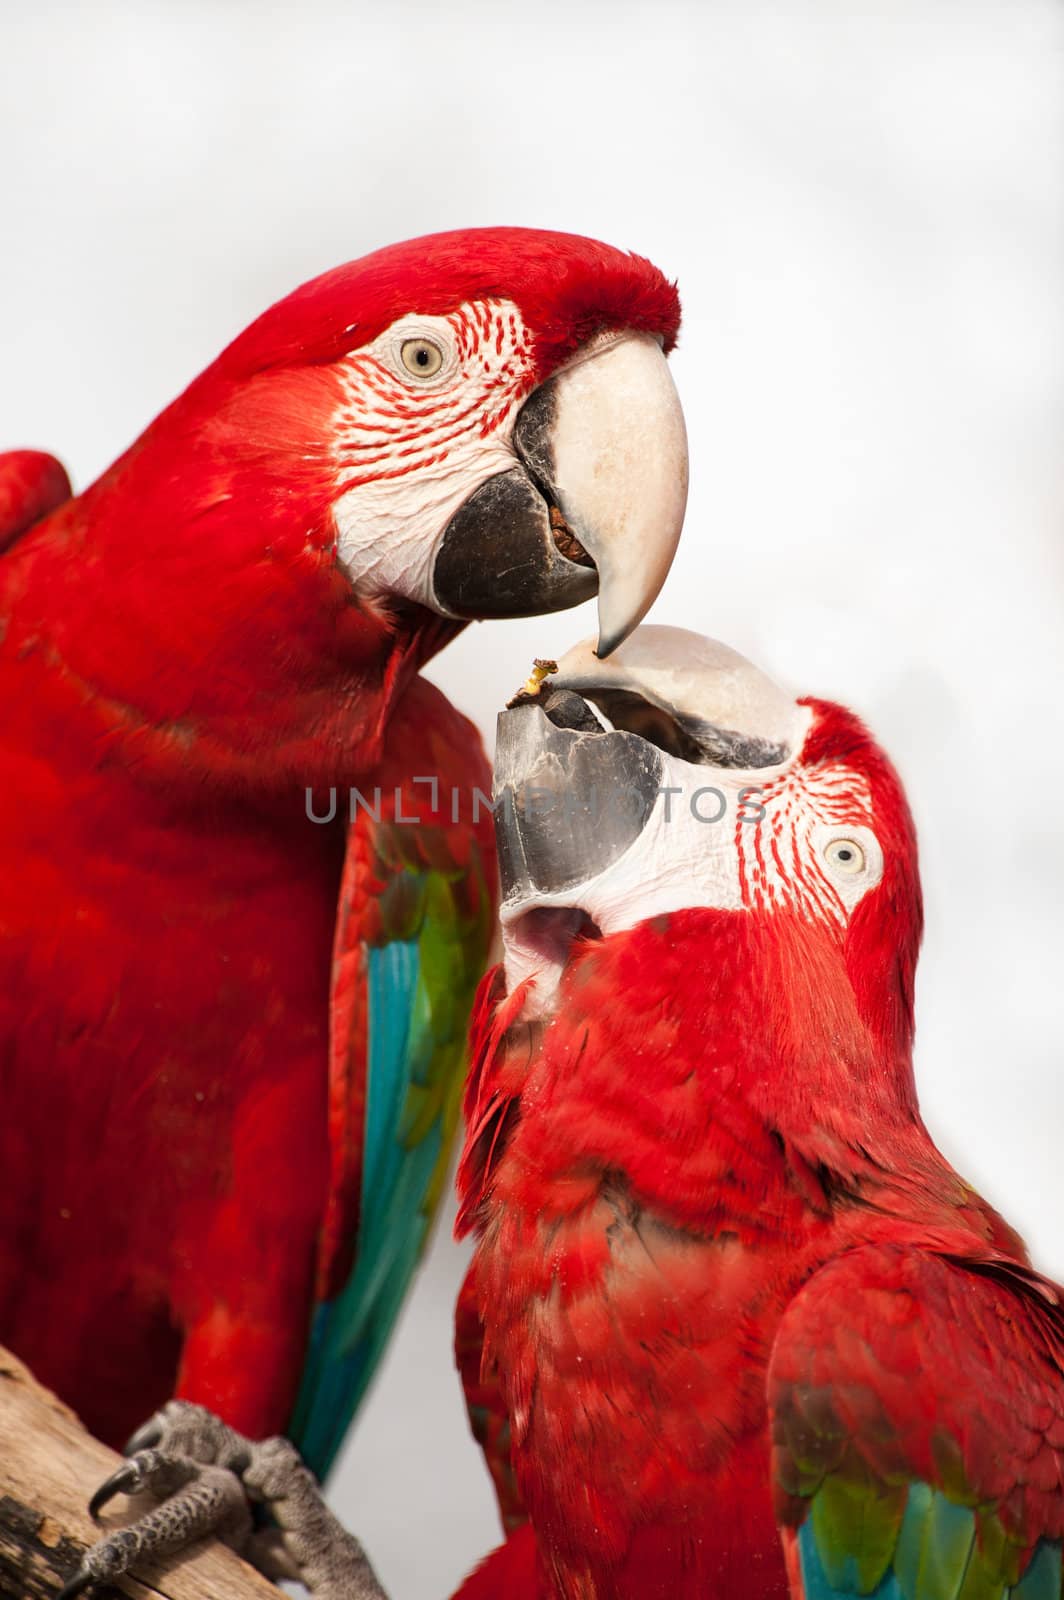 Two colorful parrots eating and looking at the camera, close up.